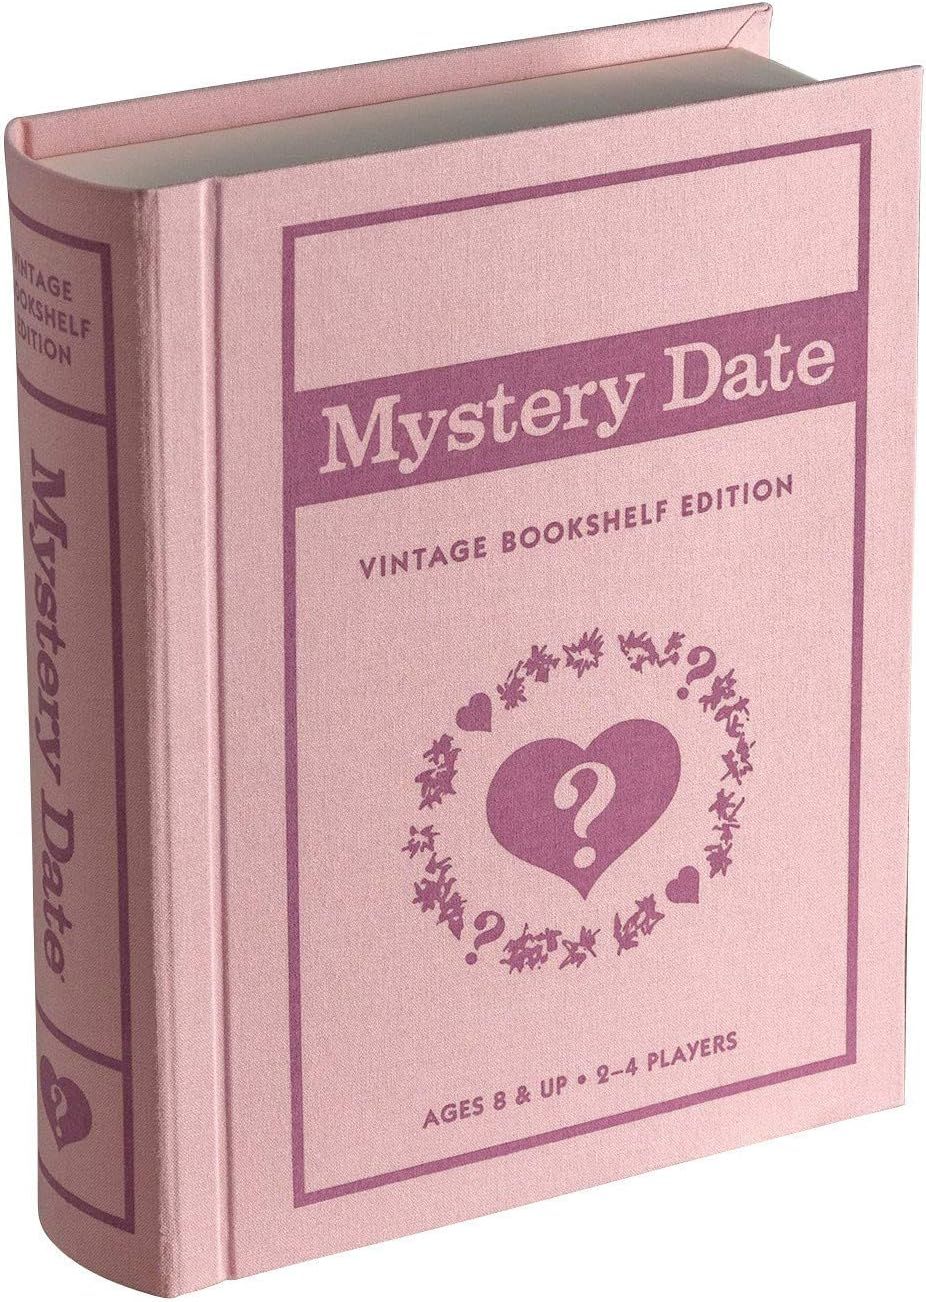 WS Game Company Mystery Date Vintage Bookshelf Edition, Pink | Amazon (US)